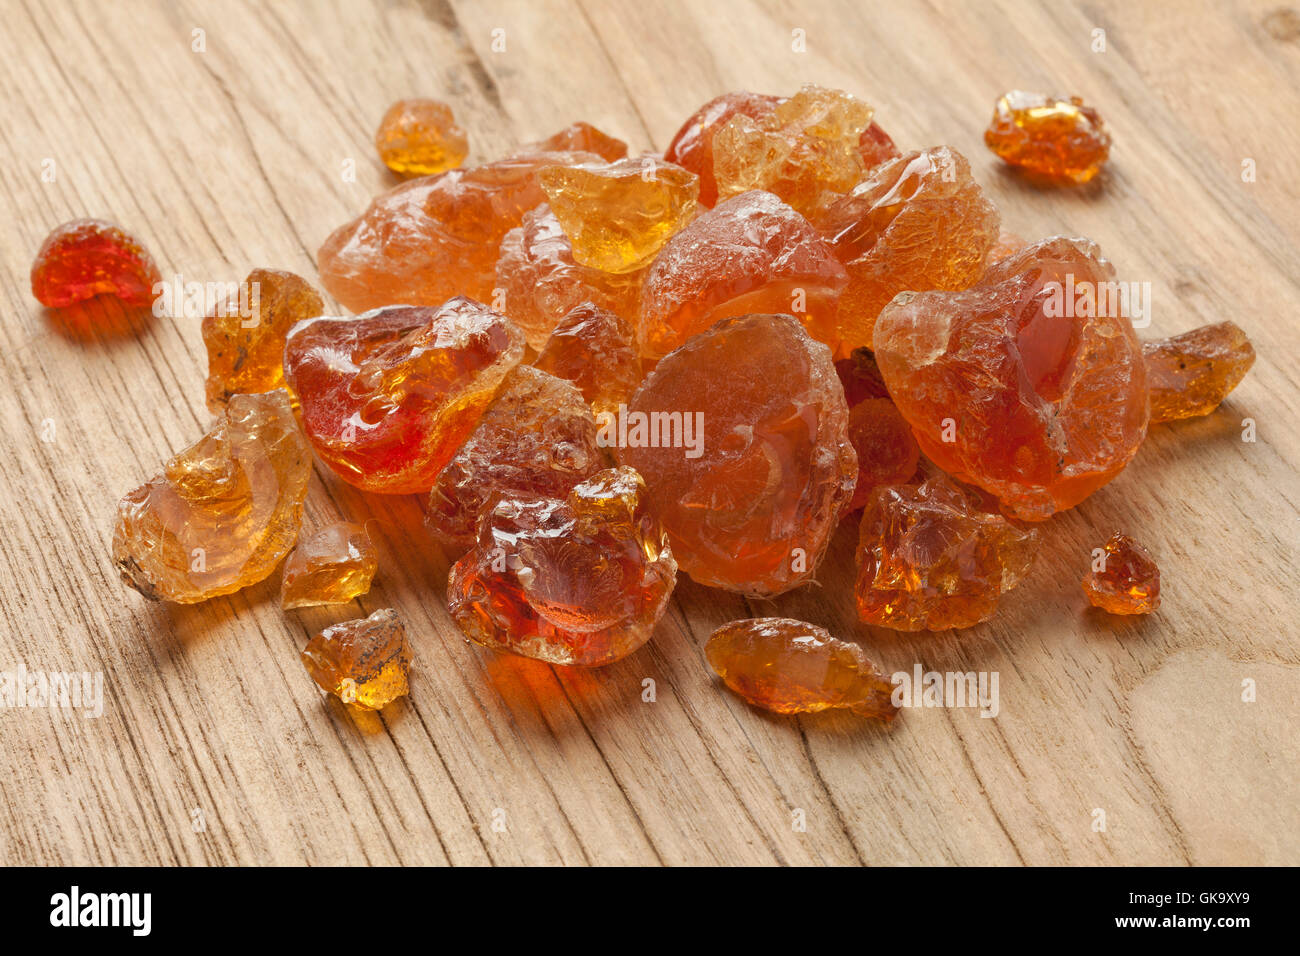 Heap of pieces of Gum arabic Stock Photo